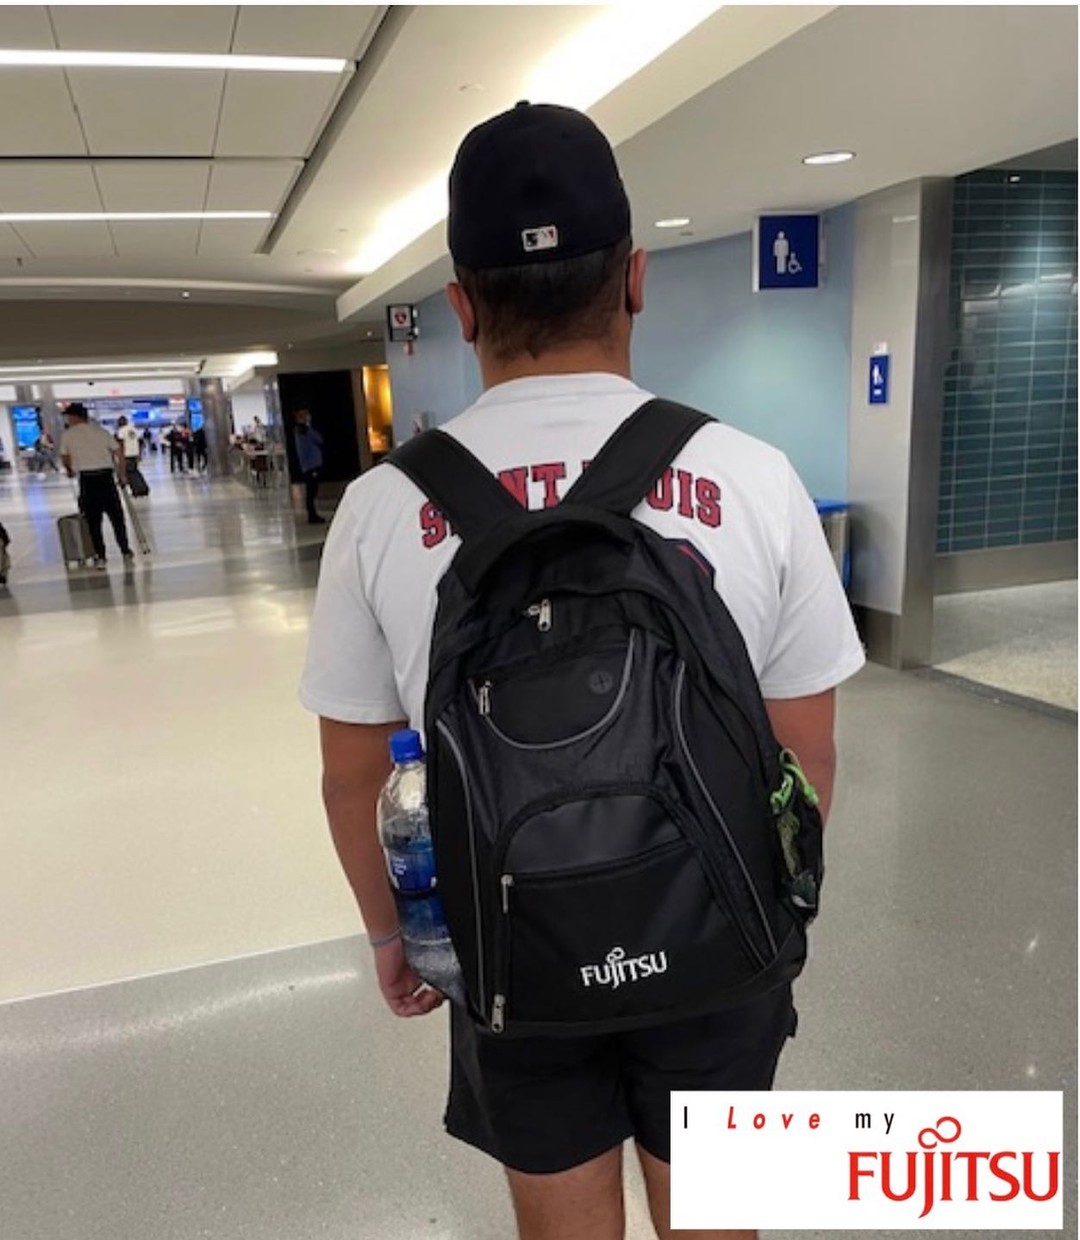 Spotted at Los Angeles international airport. This cool and smart student from Hawaii returning to school representing Fujitsu!
#oahuhvac #mauihvac #kauaihvac #hawaiihvac #hawaiihvaccontractor #hawaiihvacsuperstore #hvactechnician #hvac #plumbing #electrician #hvactech #hvacinstall #hvaccontractor #hvacquality #hvaccontractor #hvacinstallation #airconditioninginstallation #airconditioningcontractor #facilitymanagement #propertymanagement #hawaiiconstruction #hawaiicontractor #hawaiihotel #hawaiischool #hawaiibusiness